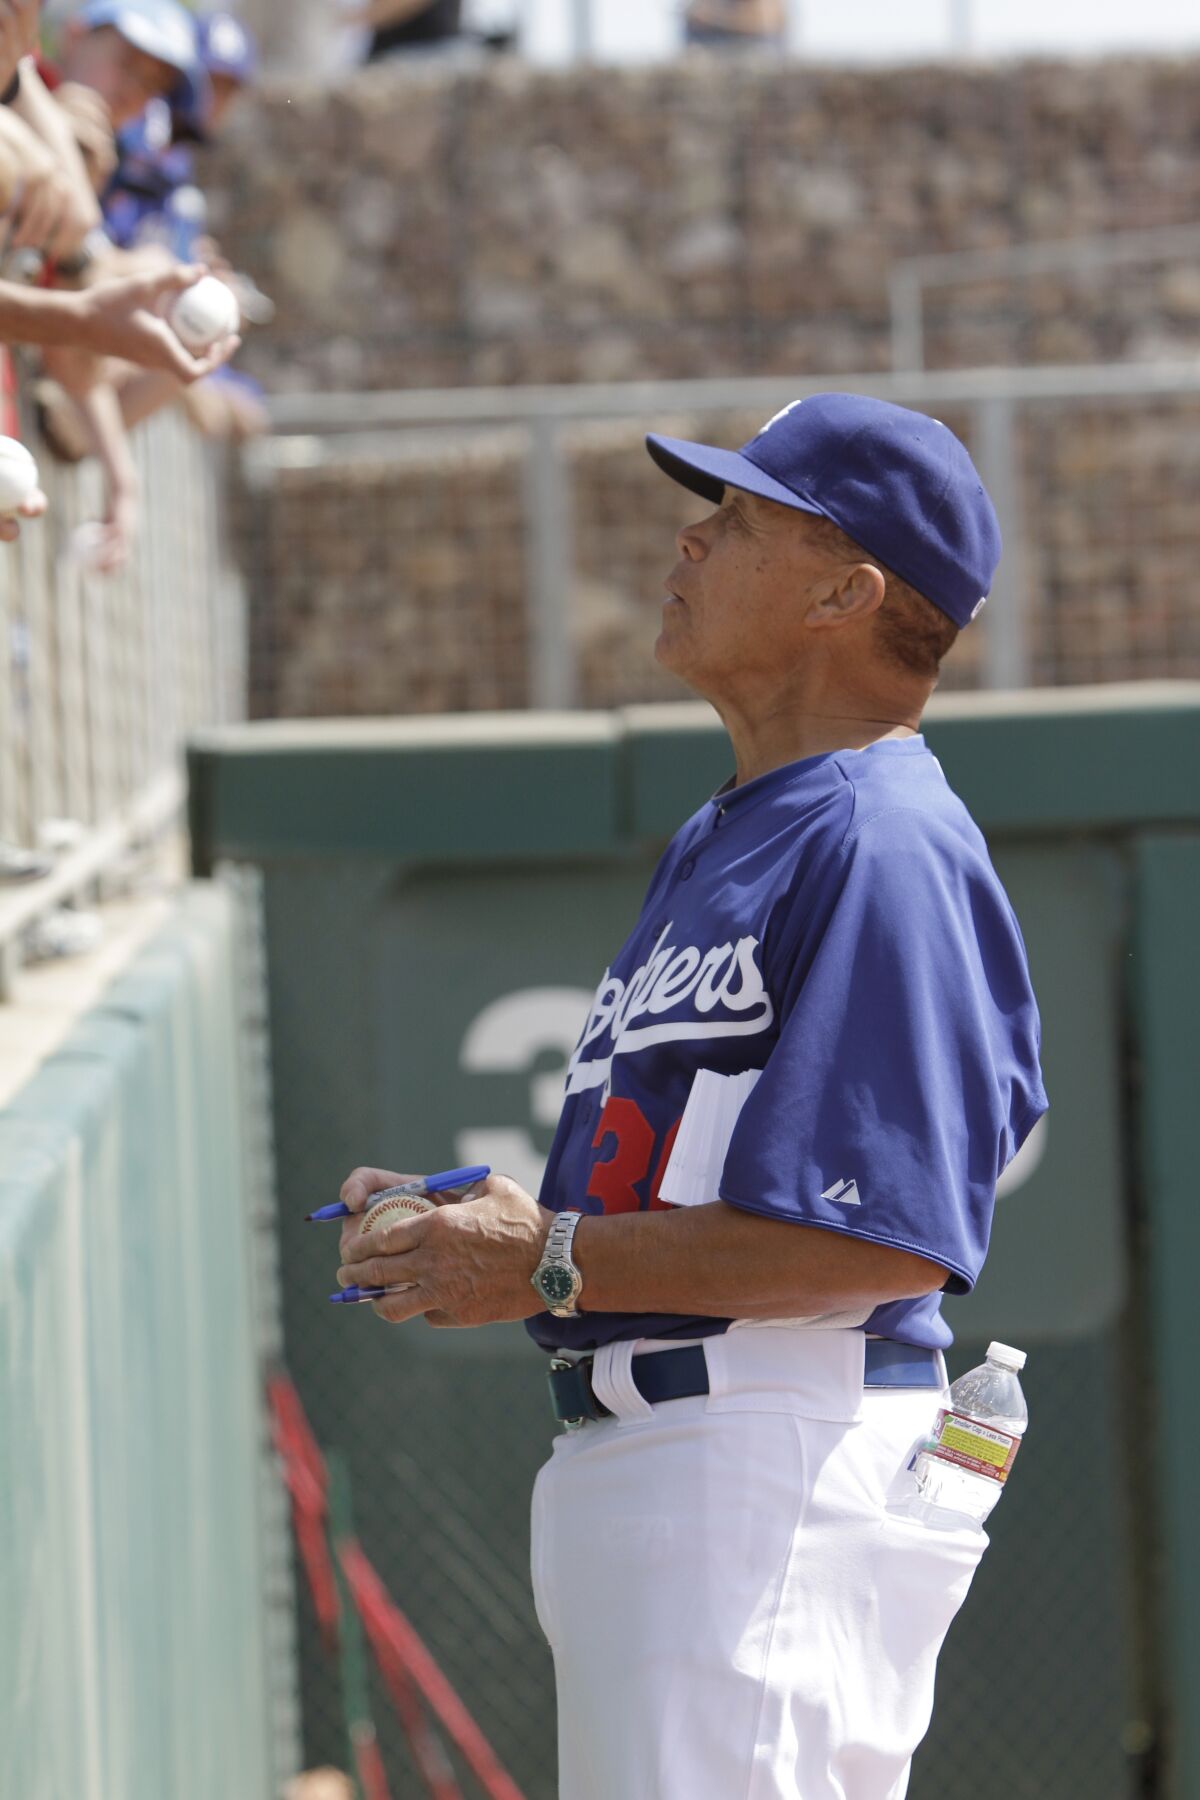 Maury Wills signs baseballs for fans.